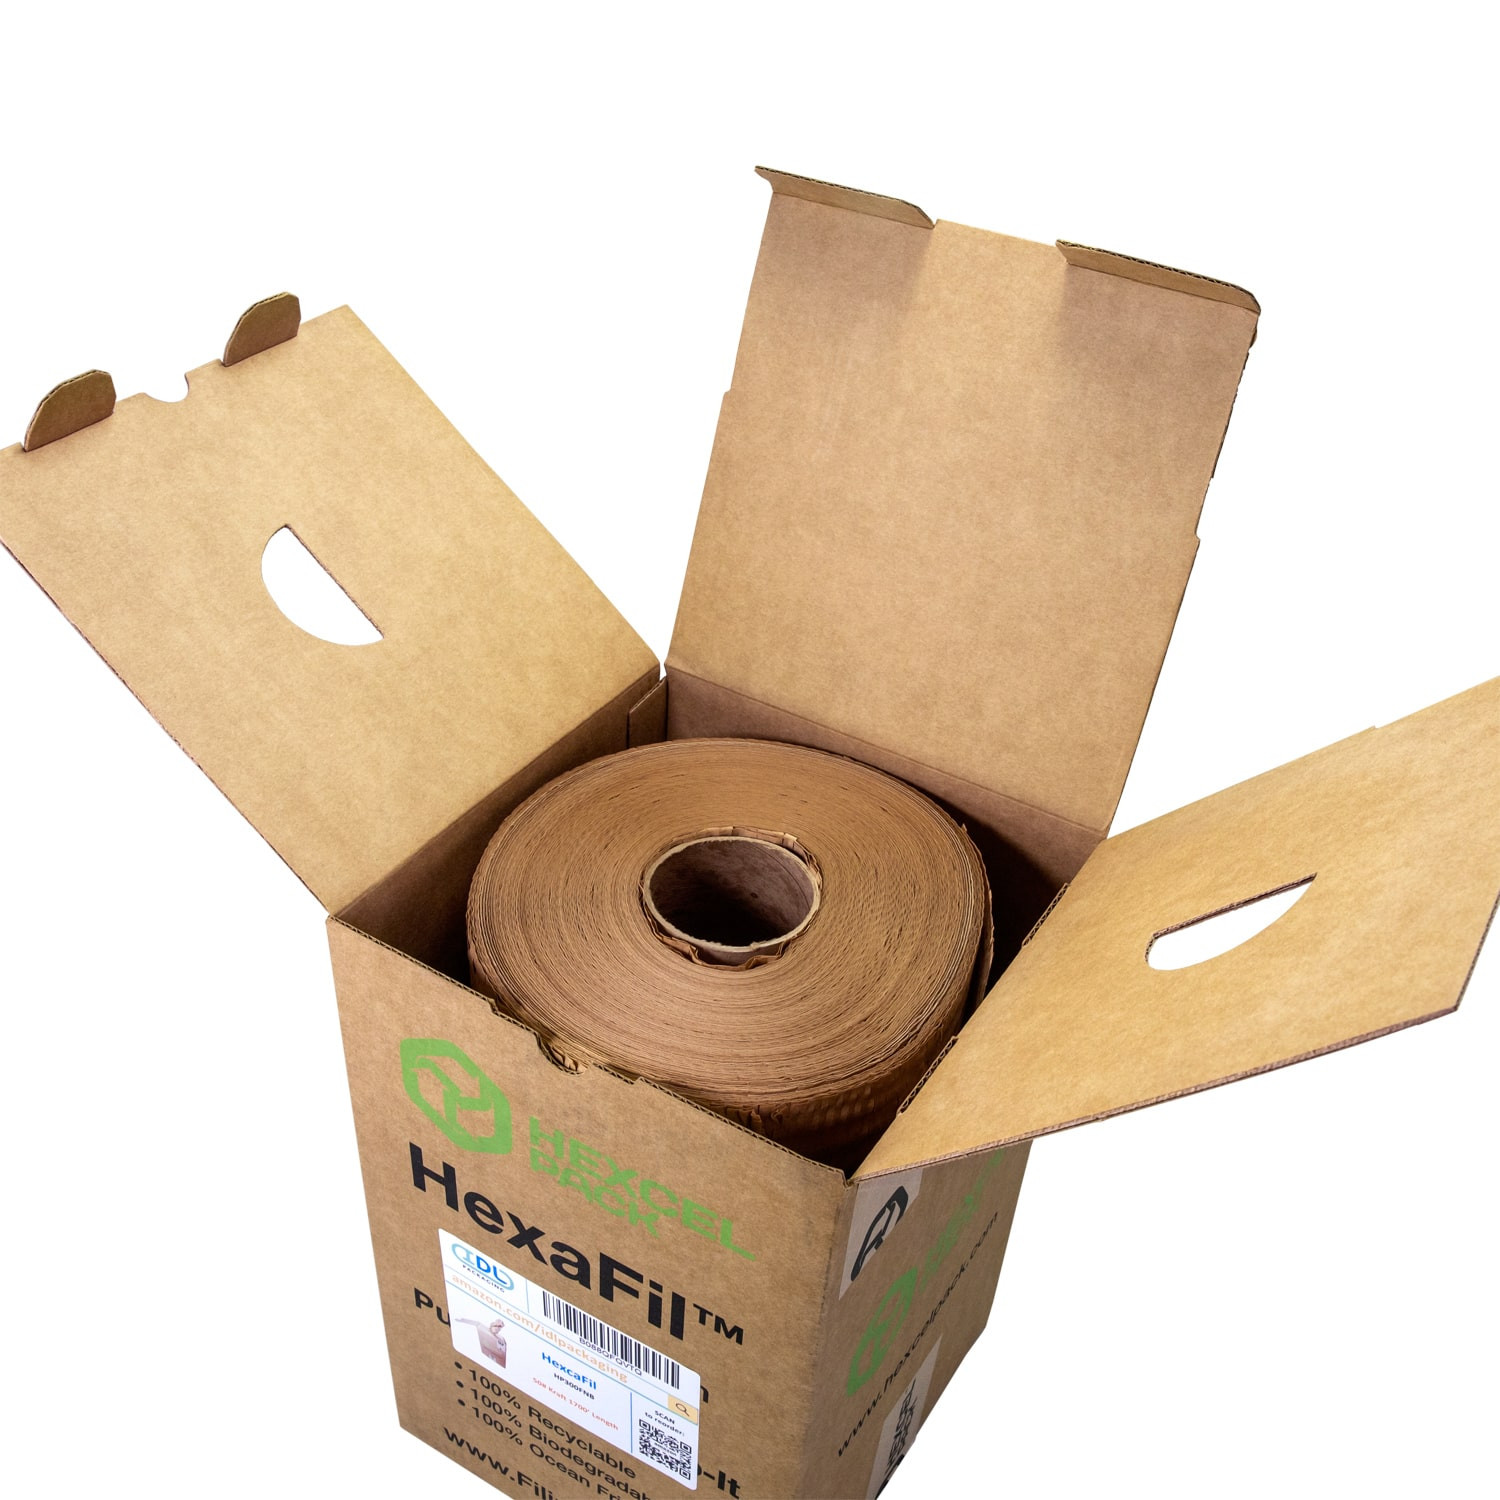 Idl Packaging HexaFil Honeycomb Packing Kraft Paper 15 x 1700' in Self-Dispensed Box - Patented Cushioning Box Filler for Void Filling, Moving